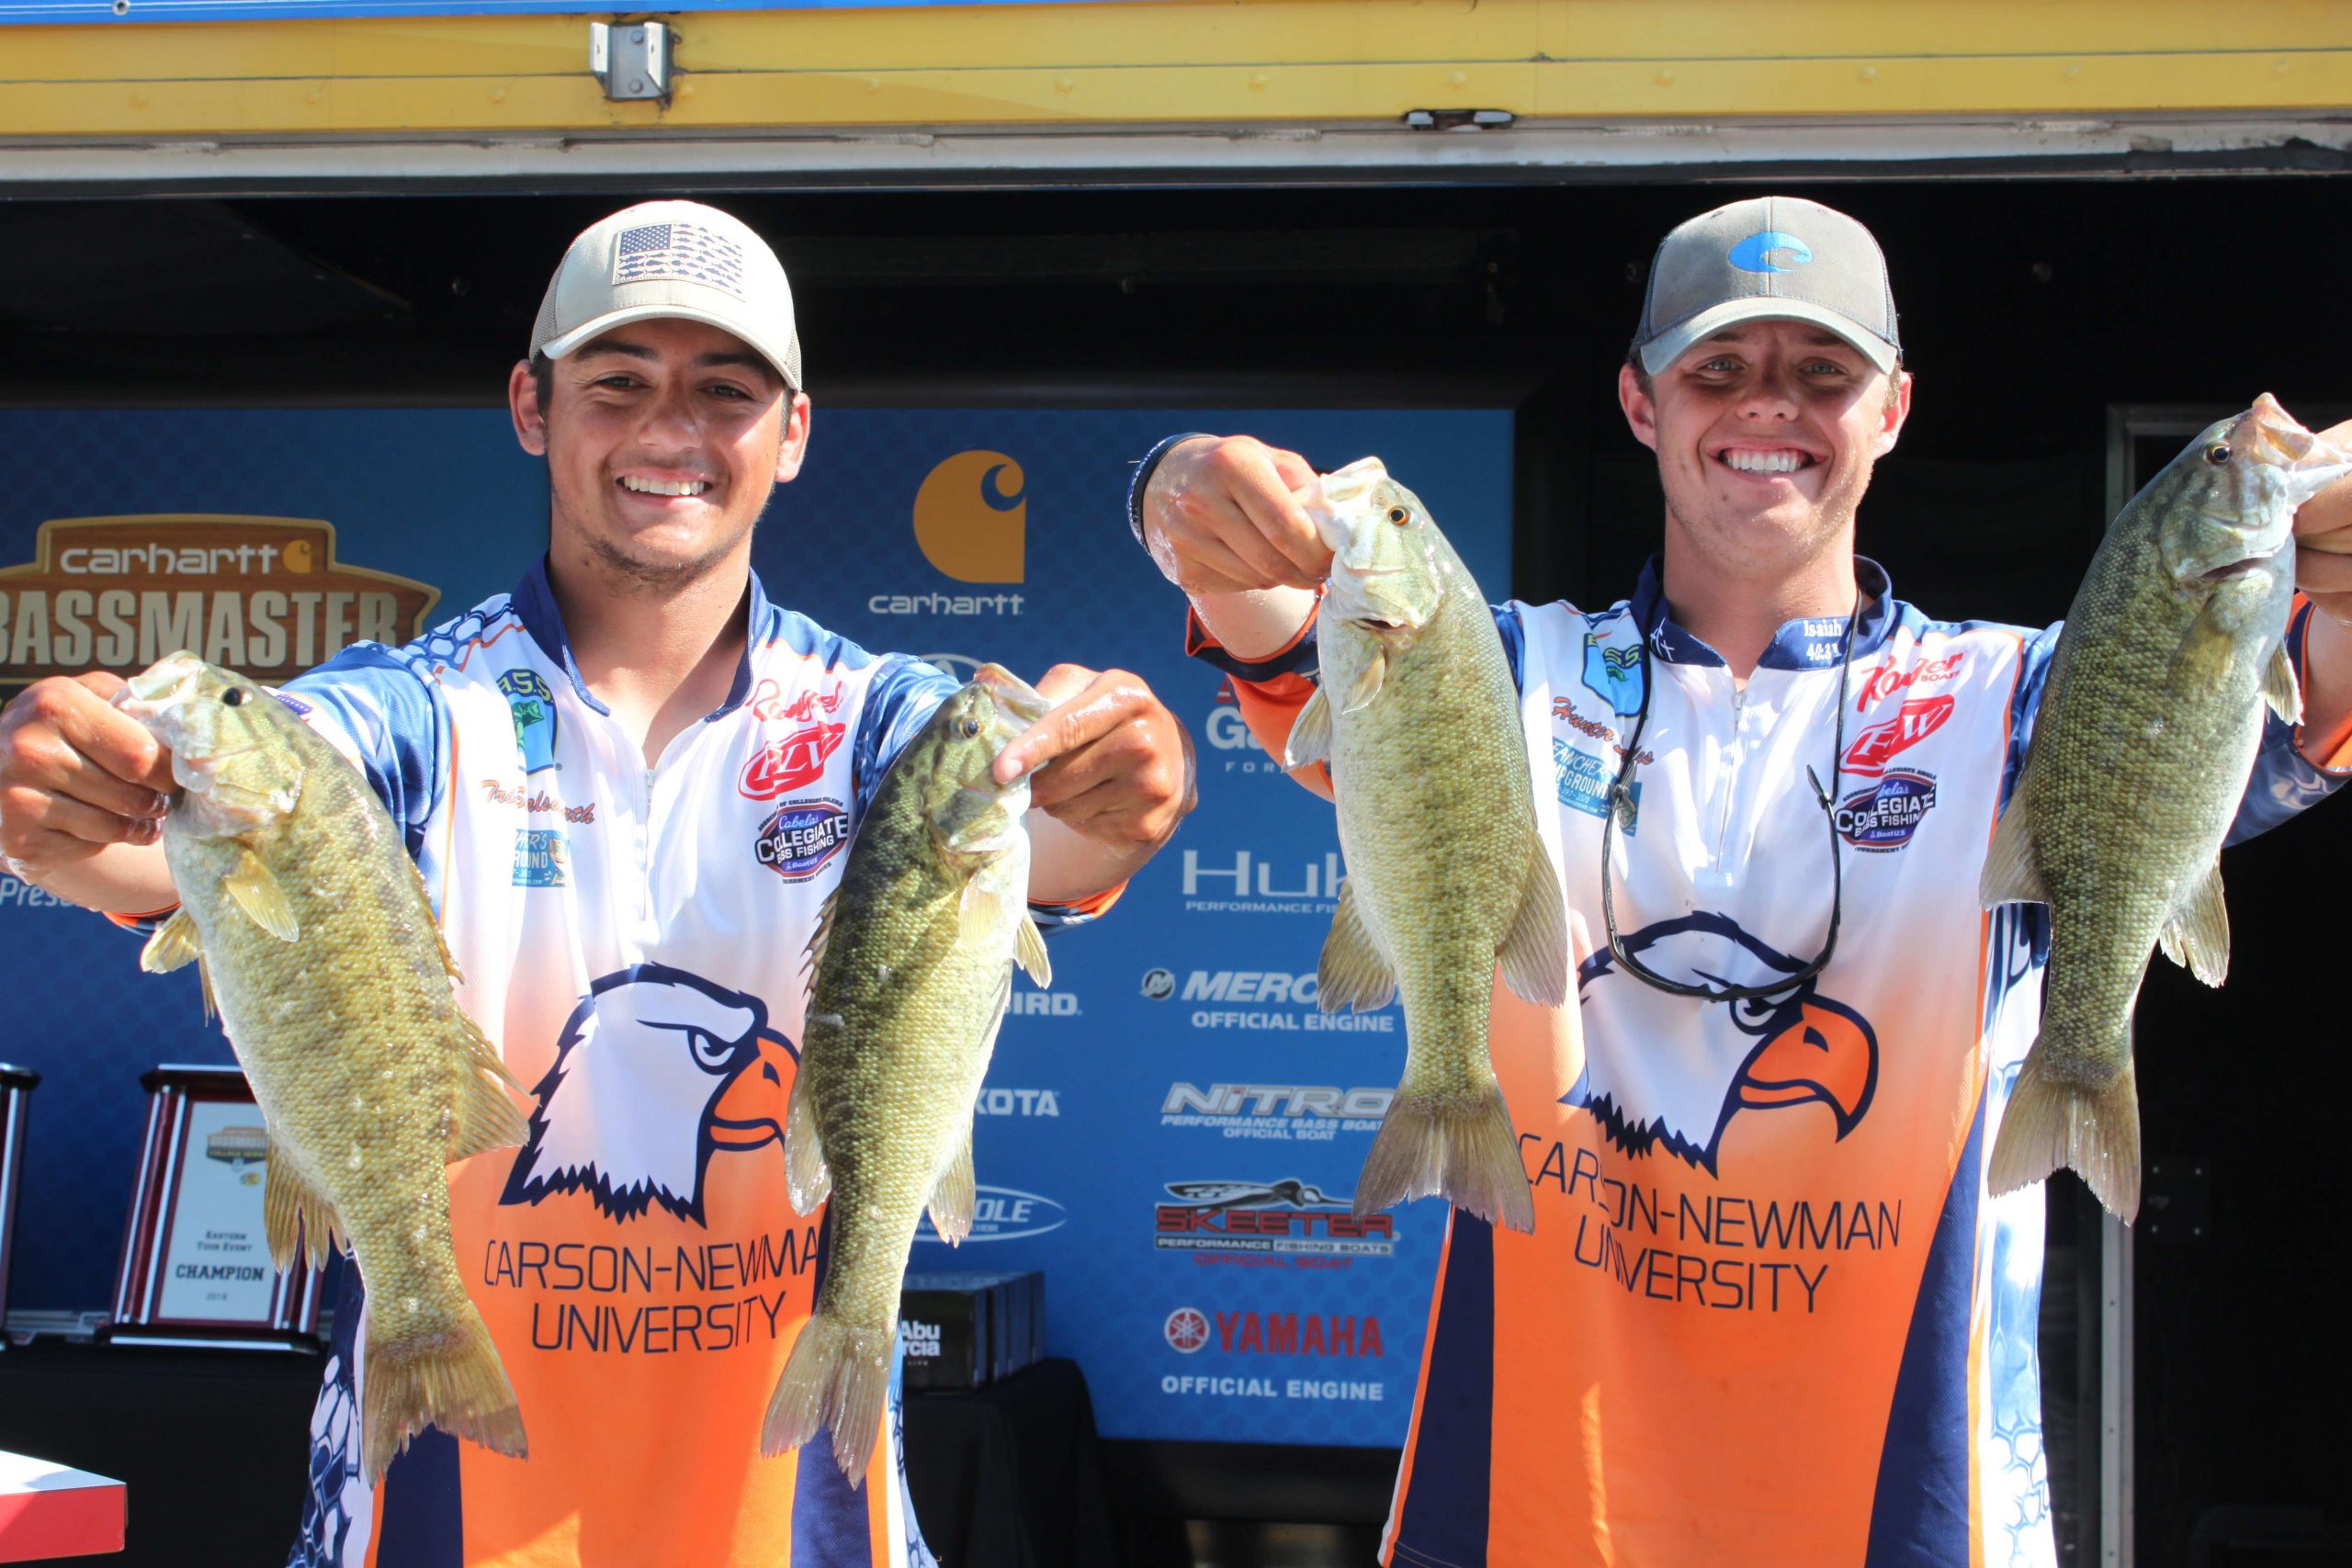 Hometown anglers Hunter Sales and Tristan Stalsworth of Carson-Newman University placed 15th with 36-4.